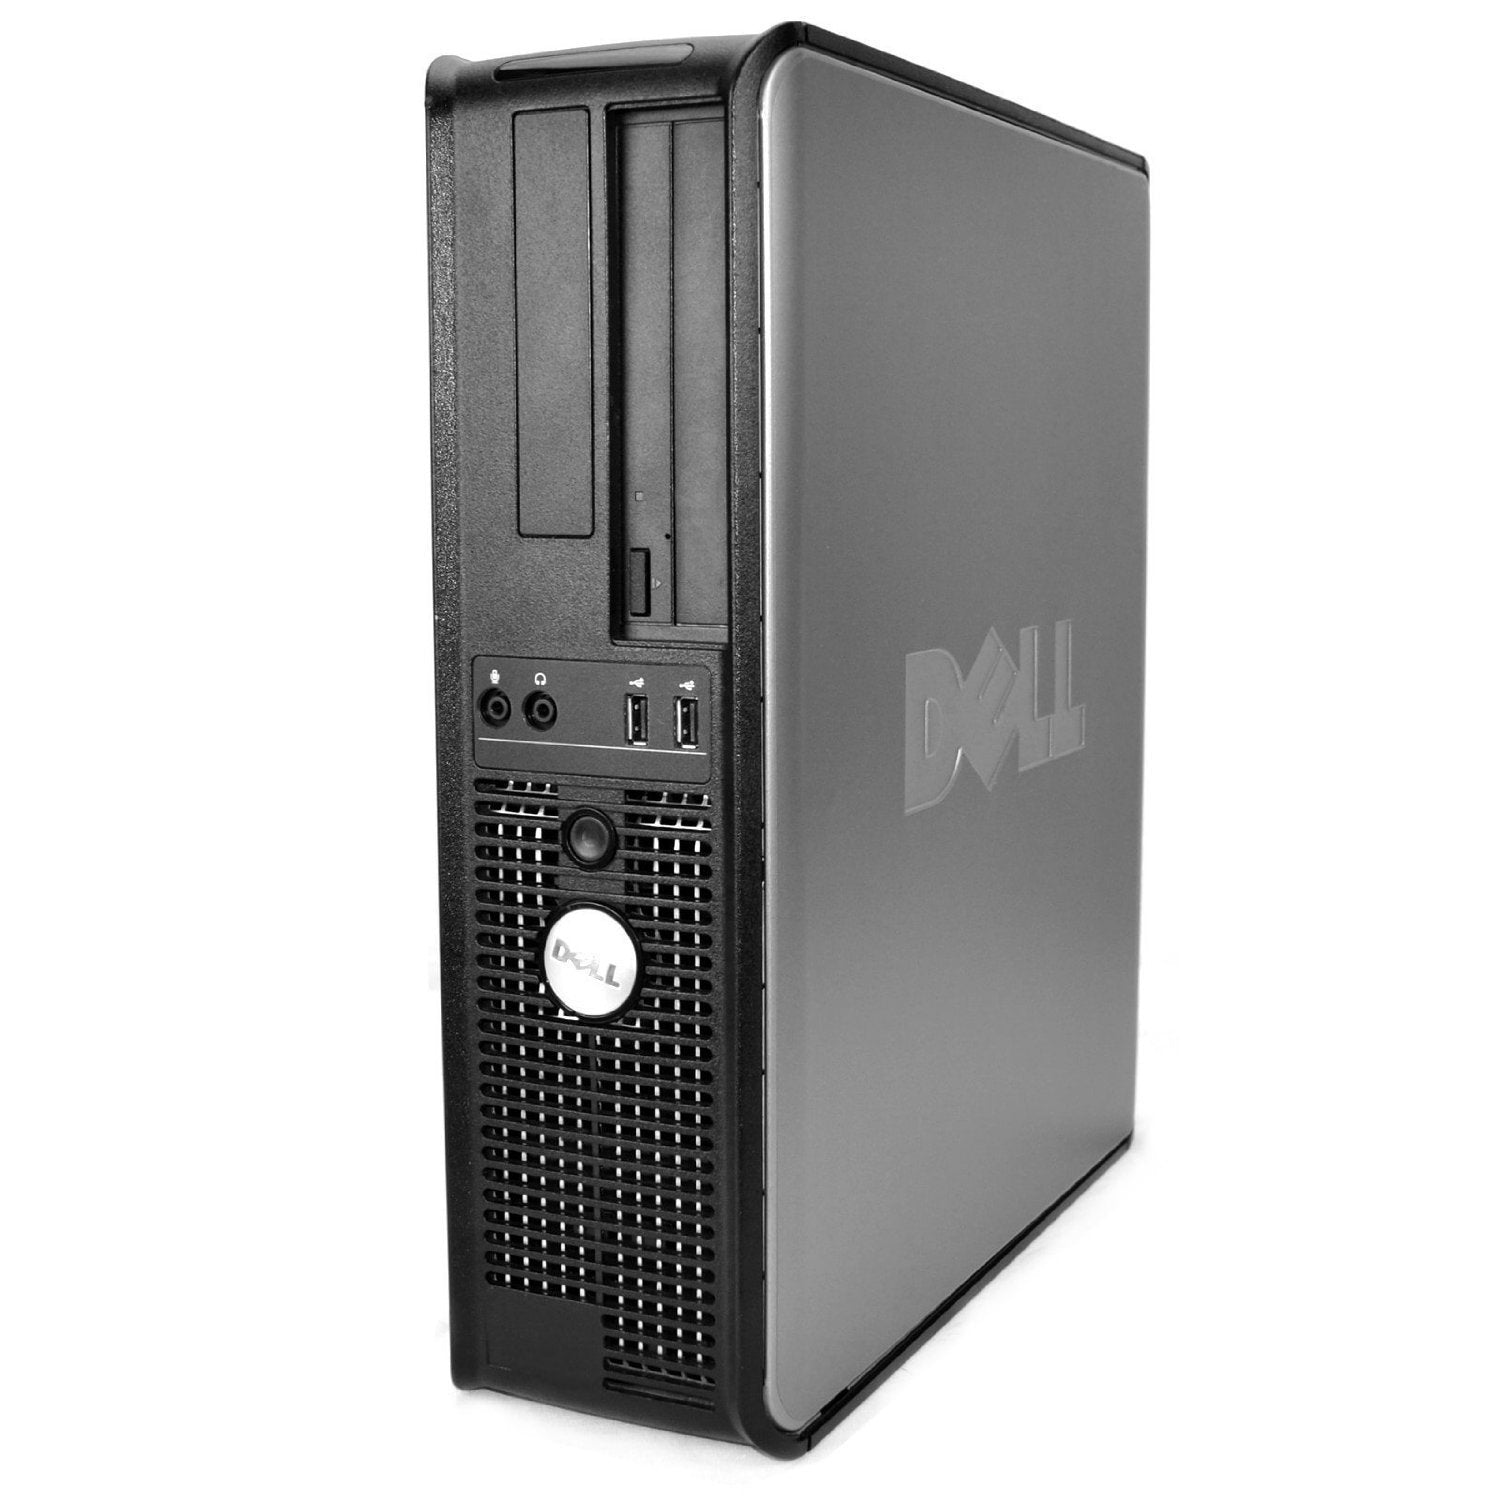 Dell Optiplex 3.3 GHz Core 2 Duo PC, 6GB, 500 GB HDD, Windows 10 Home x64, USB Mouse & Keyboard